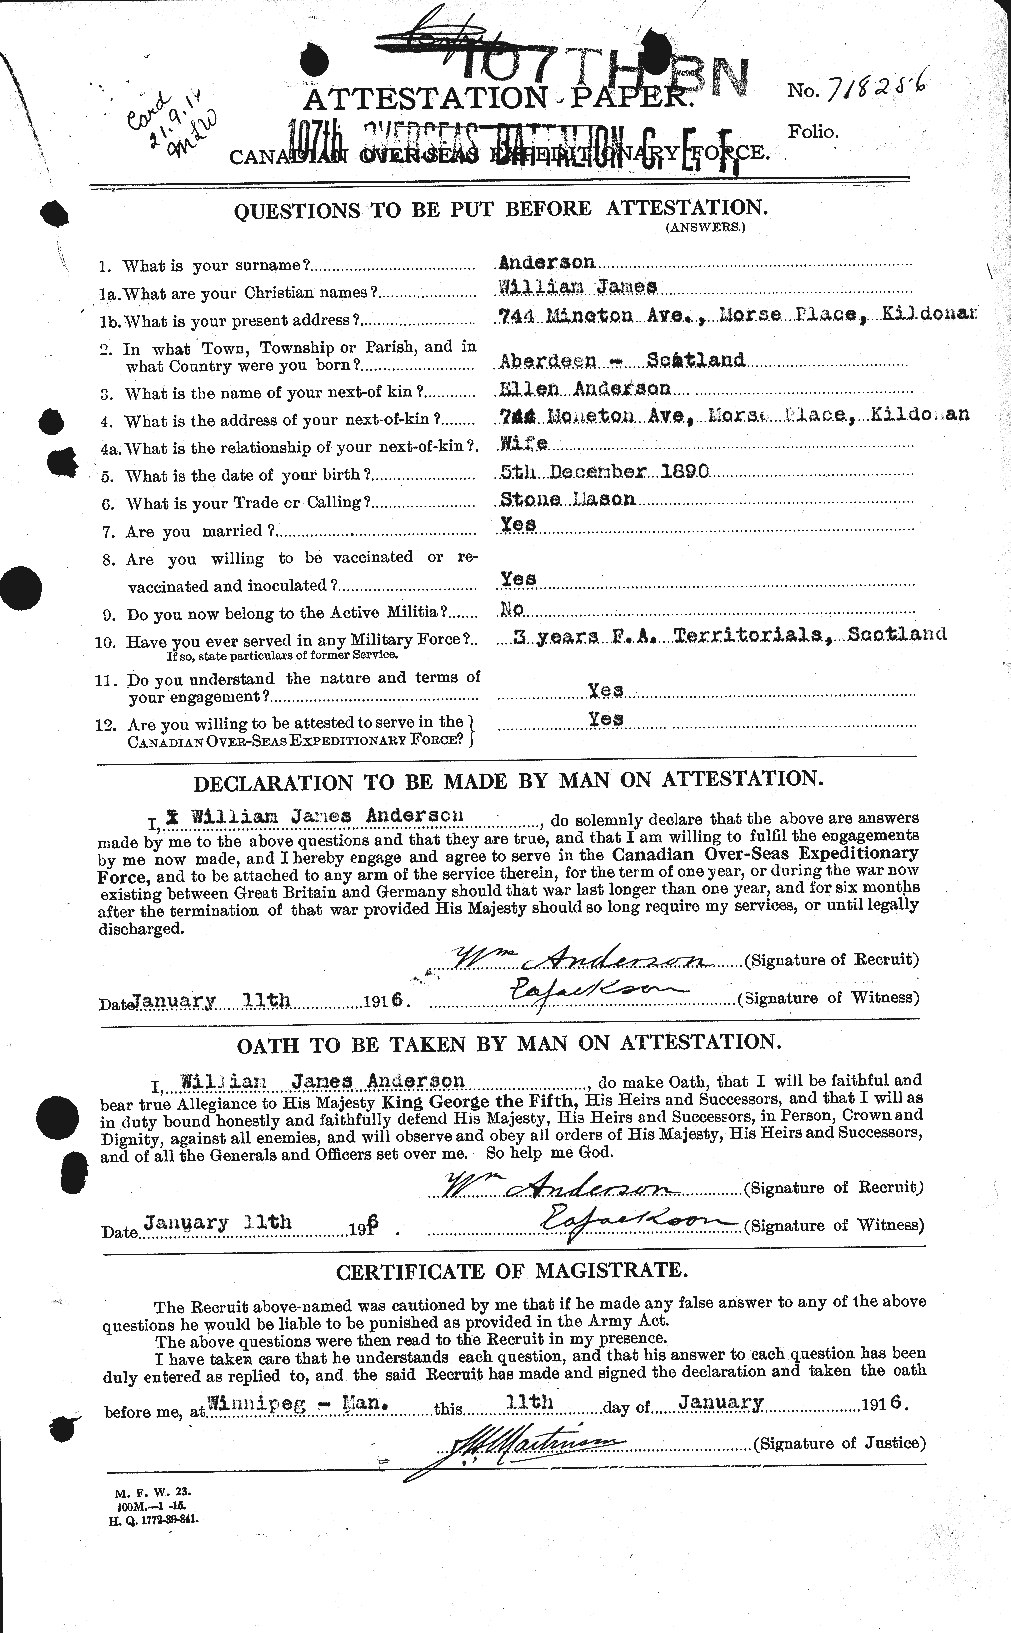 Personnel Records of the First World War - CEF 210810a